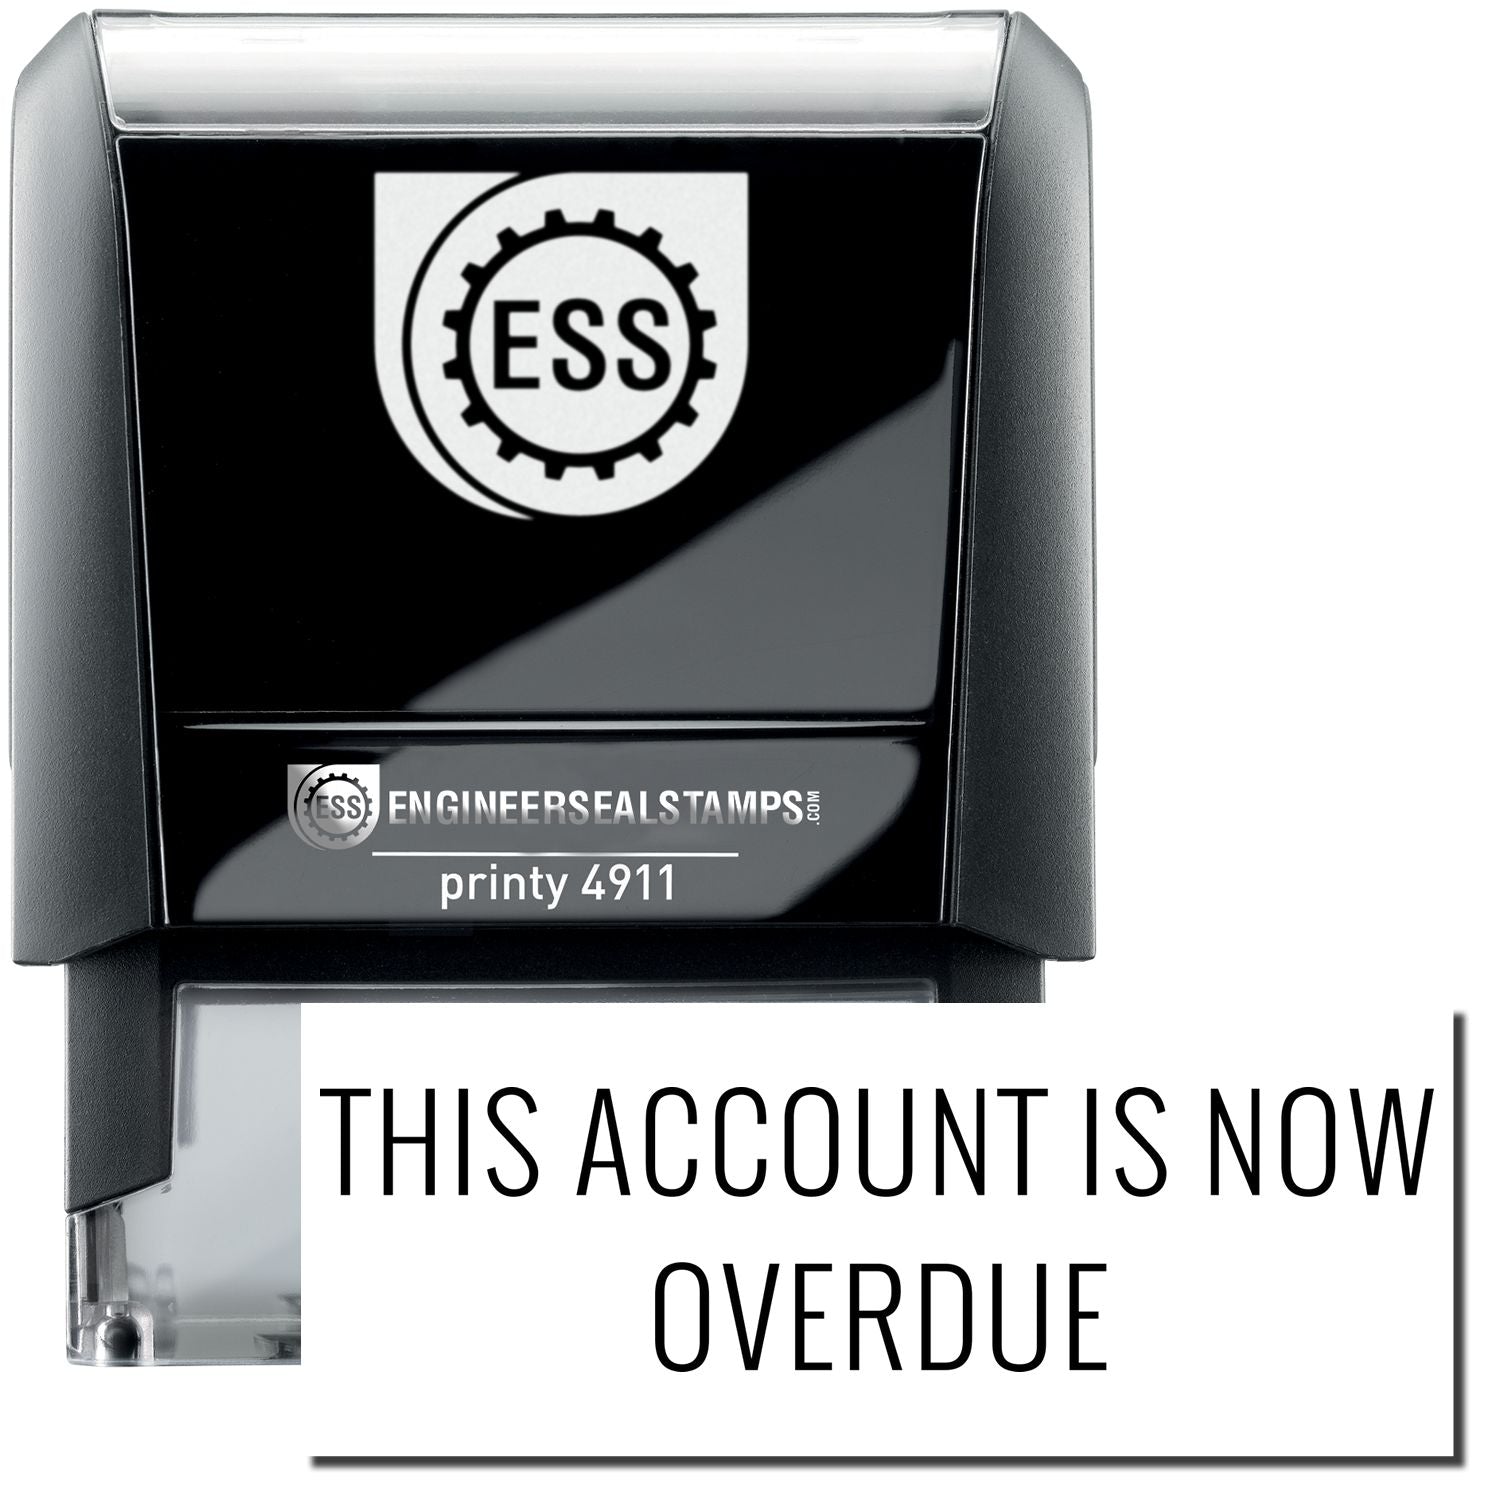 A self-inking stamp with a stamped image showing how the text "THIS ACCOUNT IS NOW OVERDUE" is displayed after stamping.